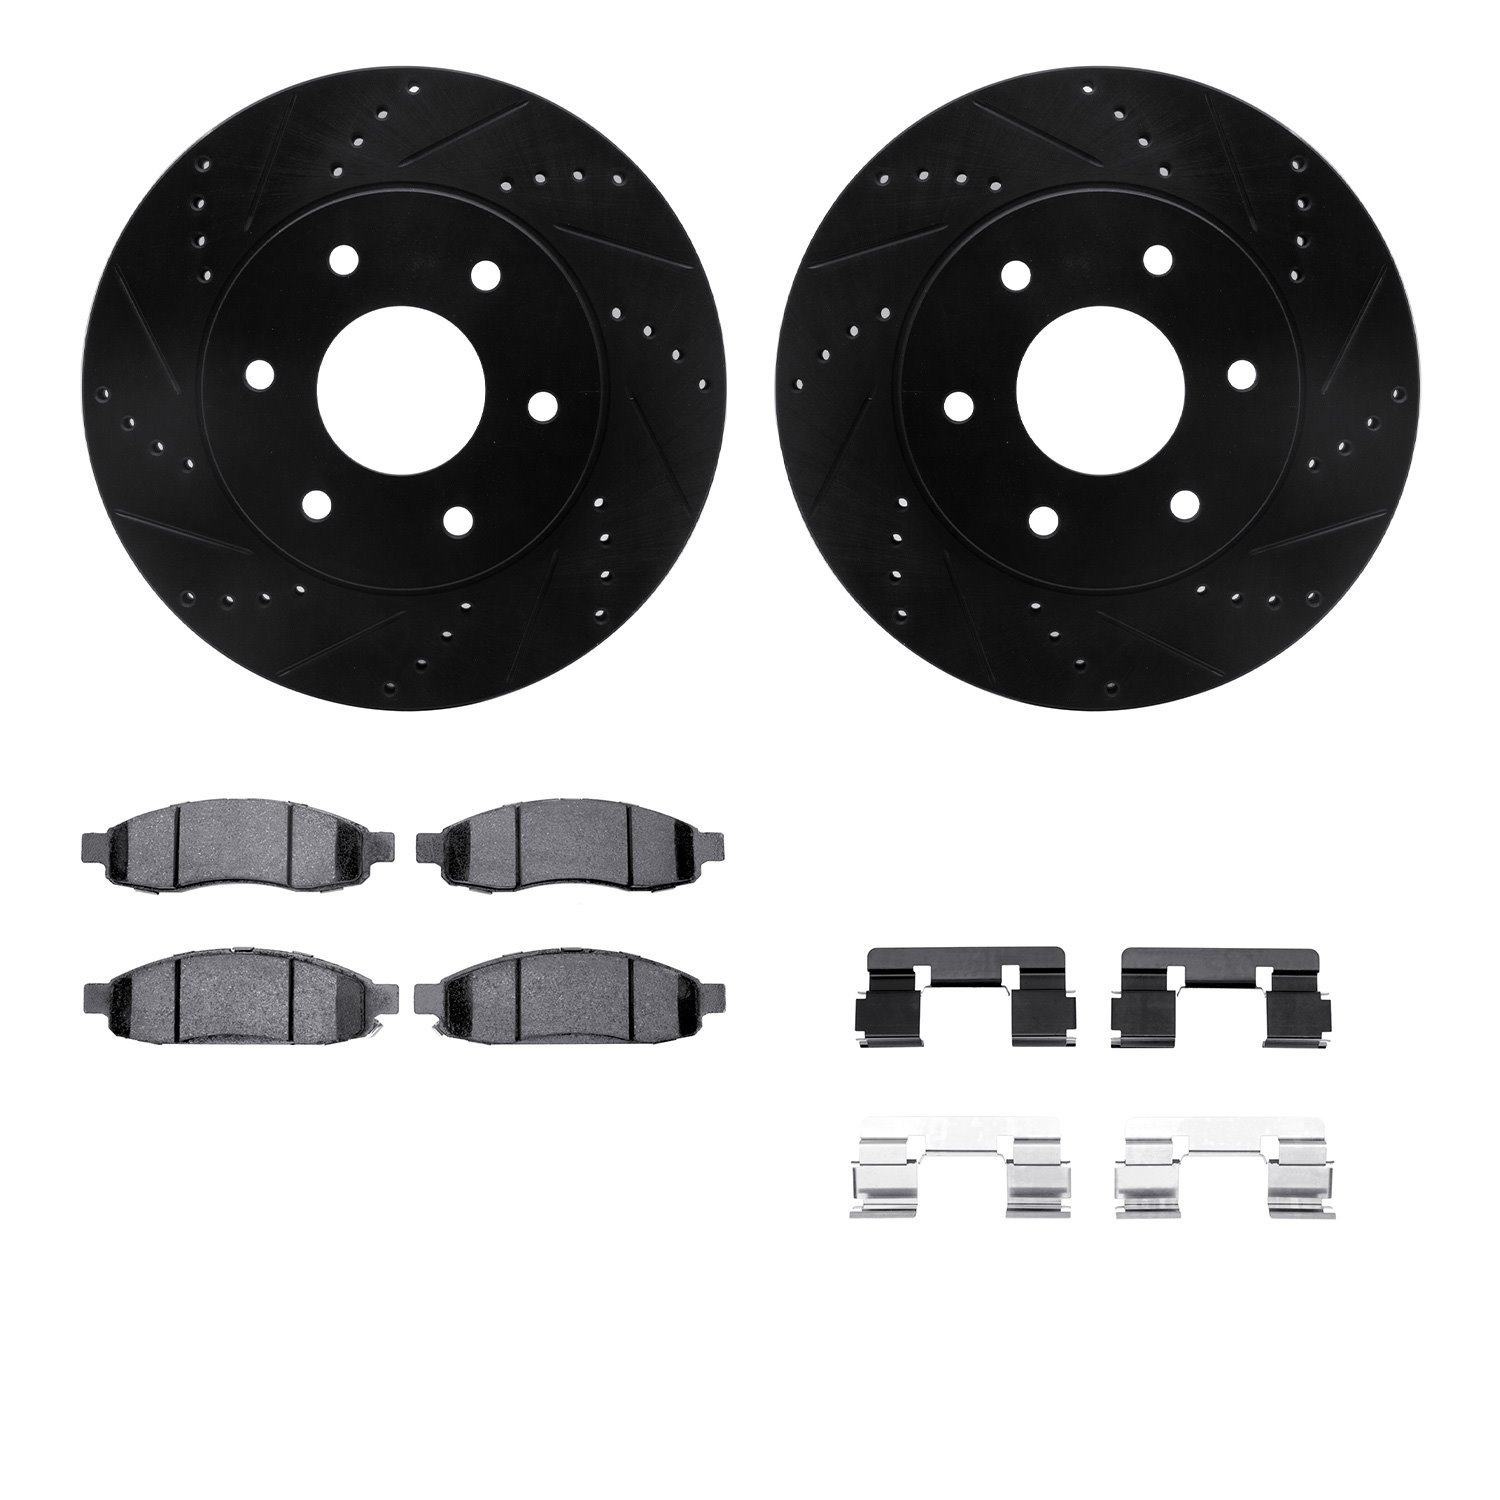 8412-67002 Drilled/Slotted Brake Rotors with Ultimate-Duty Brake Pads Kit & Hardware [Black], 2004-2005 Infiniti/Nissan, Positio